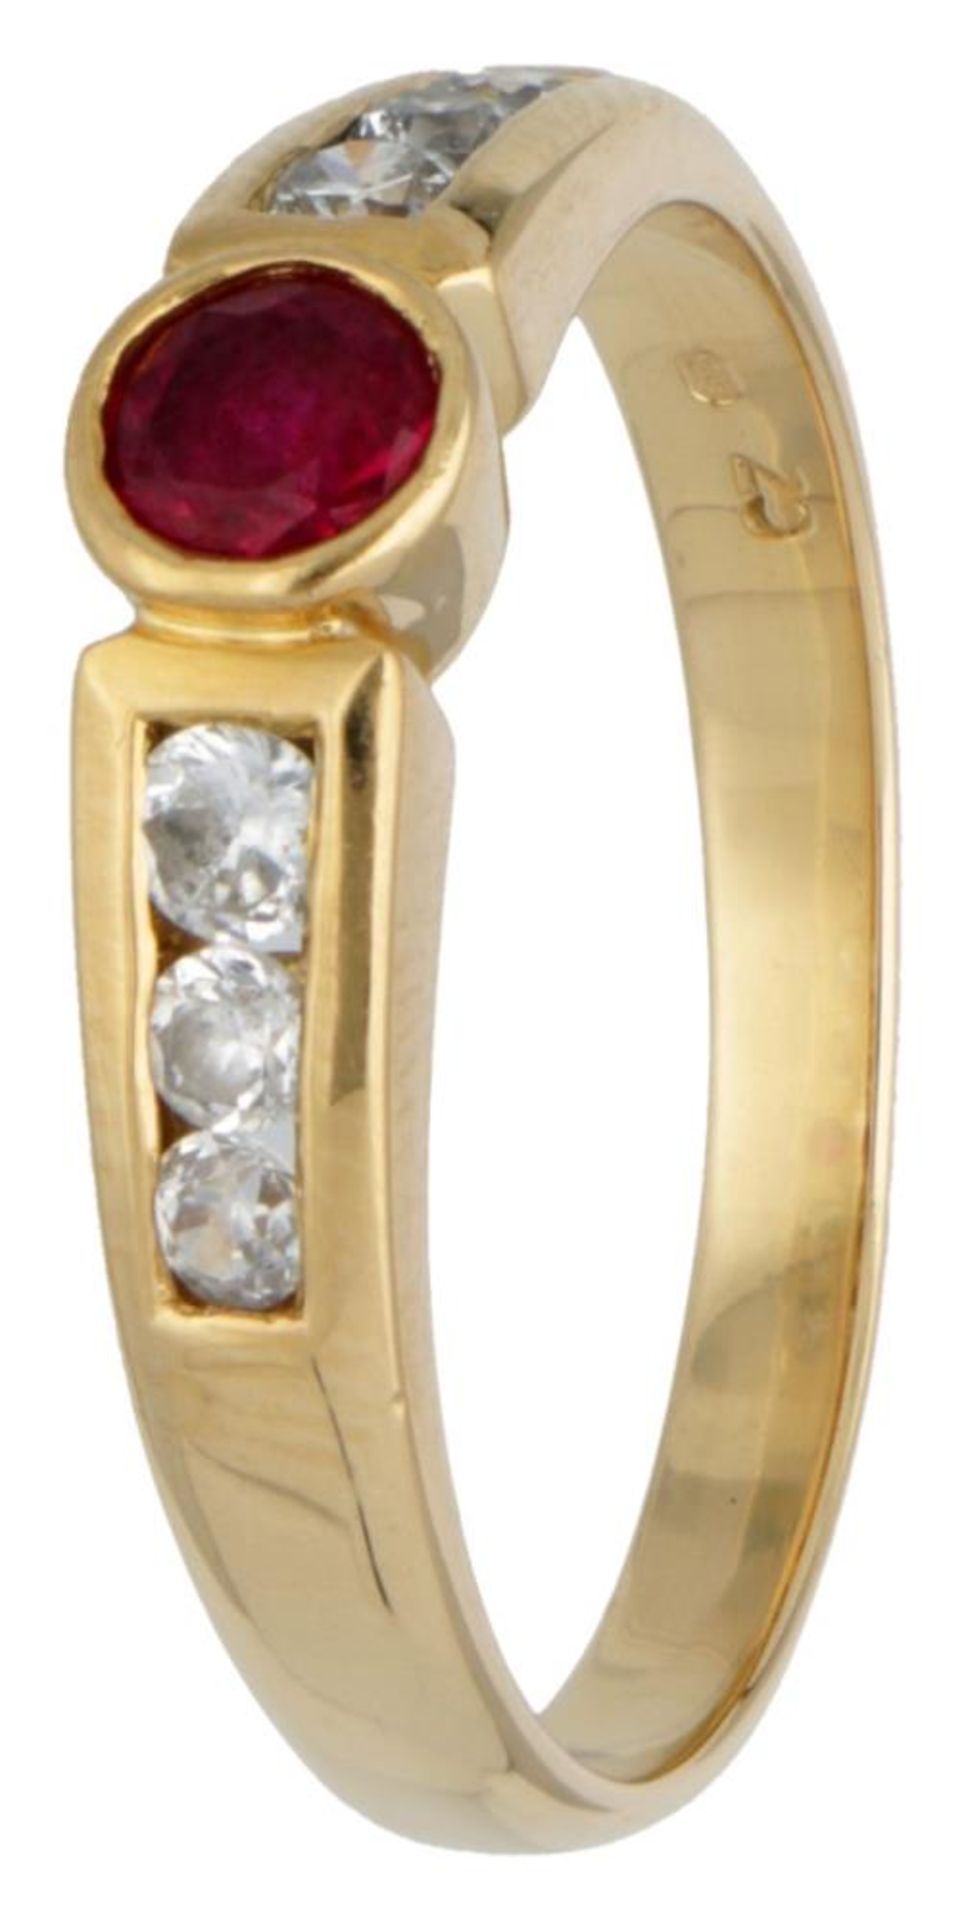 18K. Yellow gold ring set with approx. 0.31 ct. ruby and cubic zirconia.